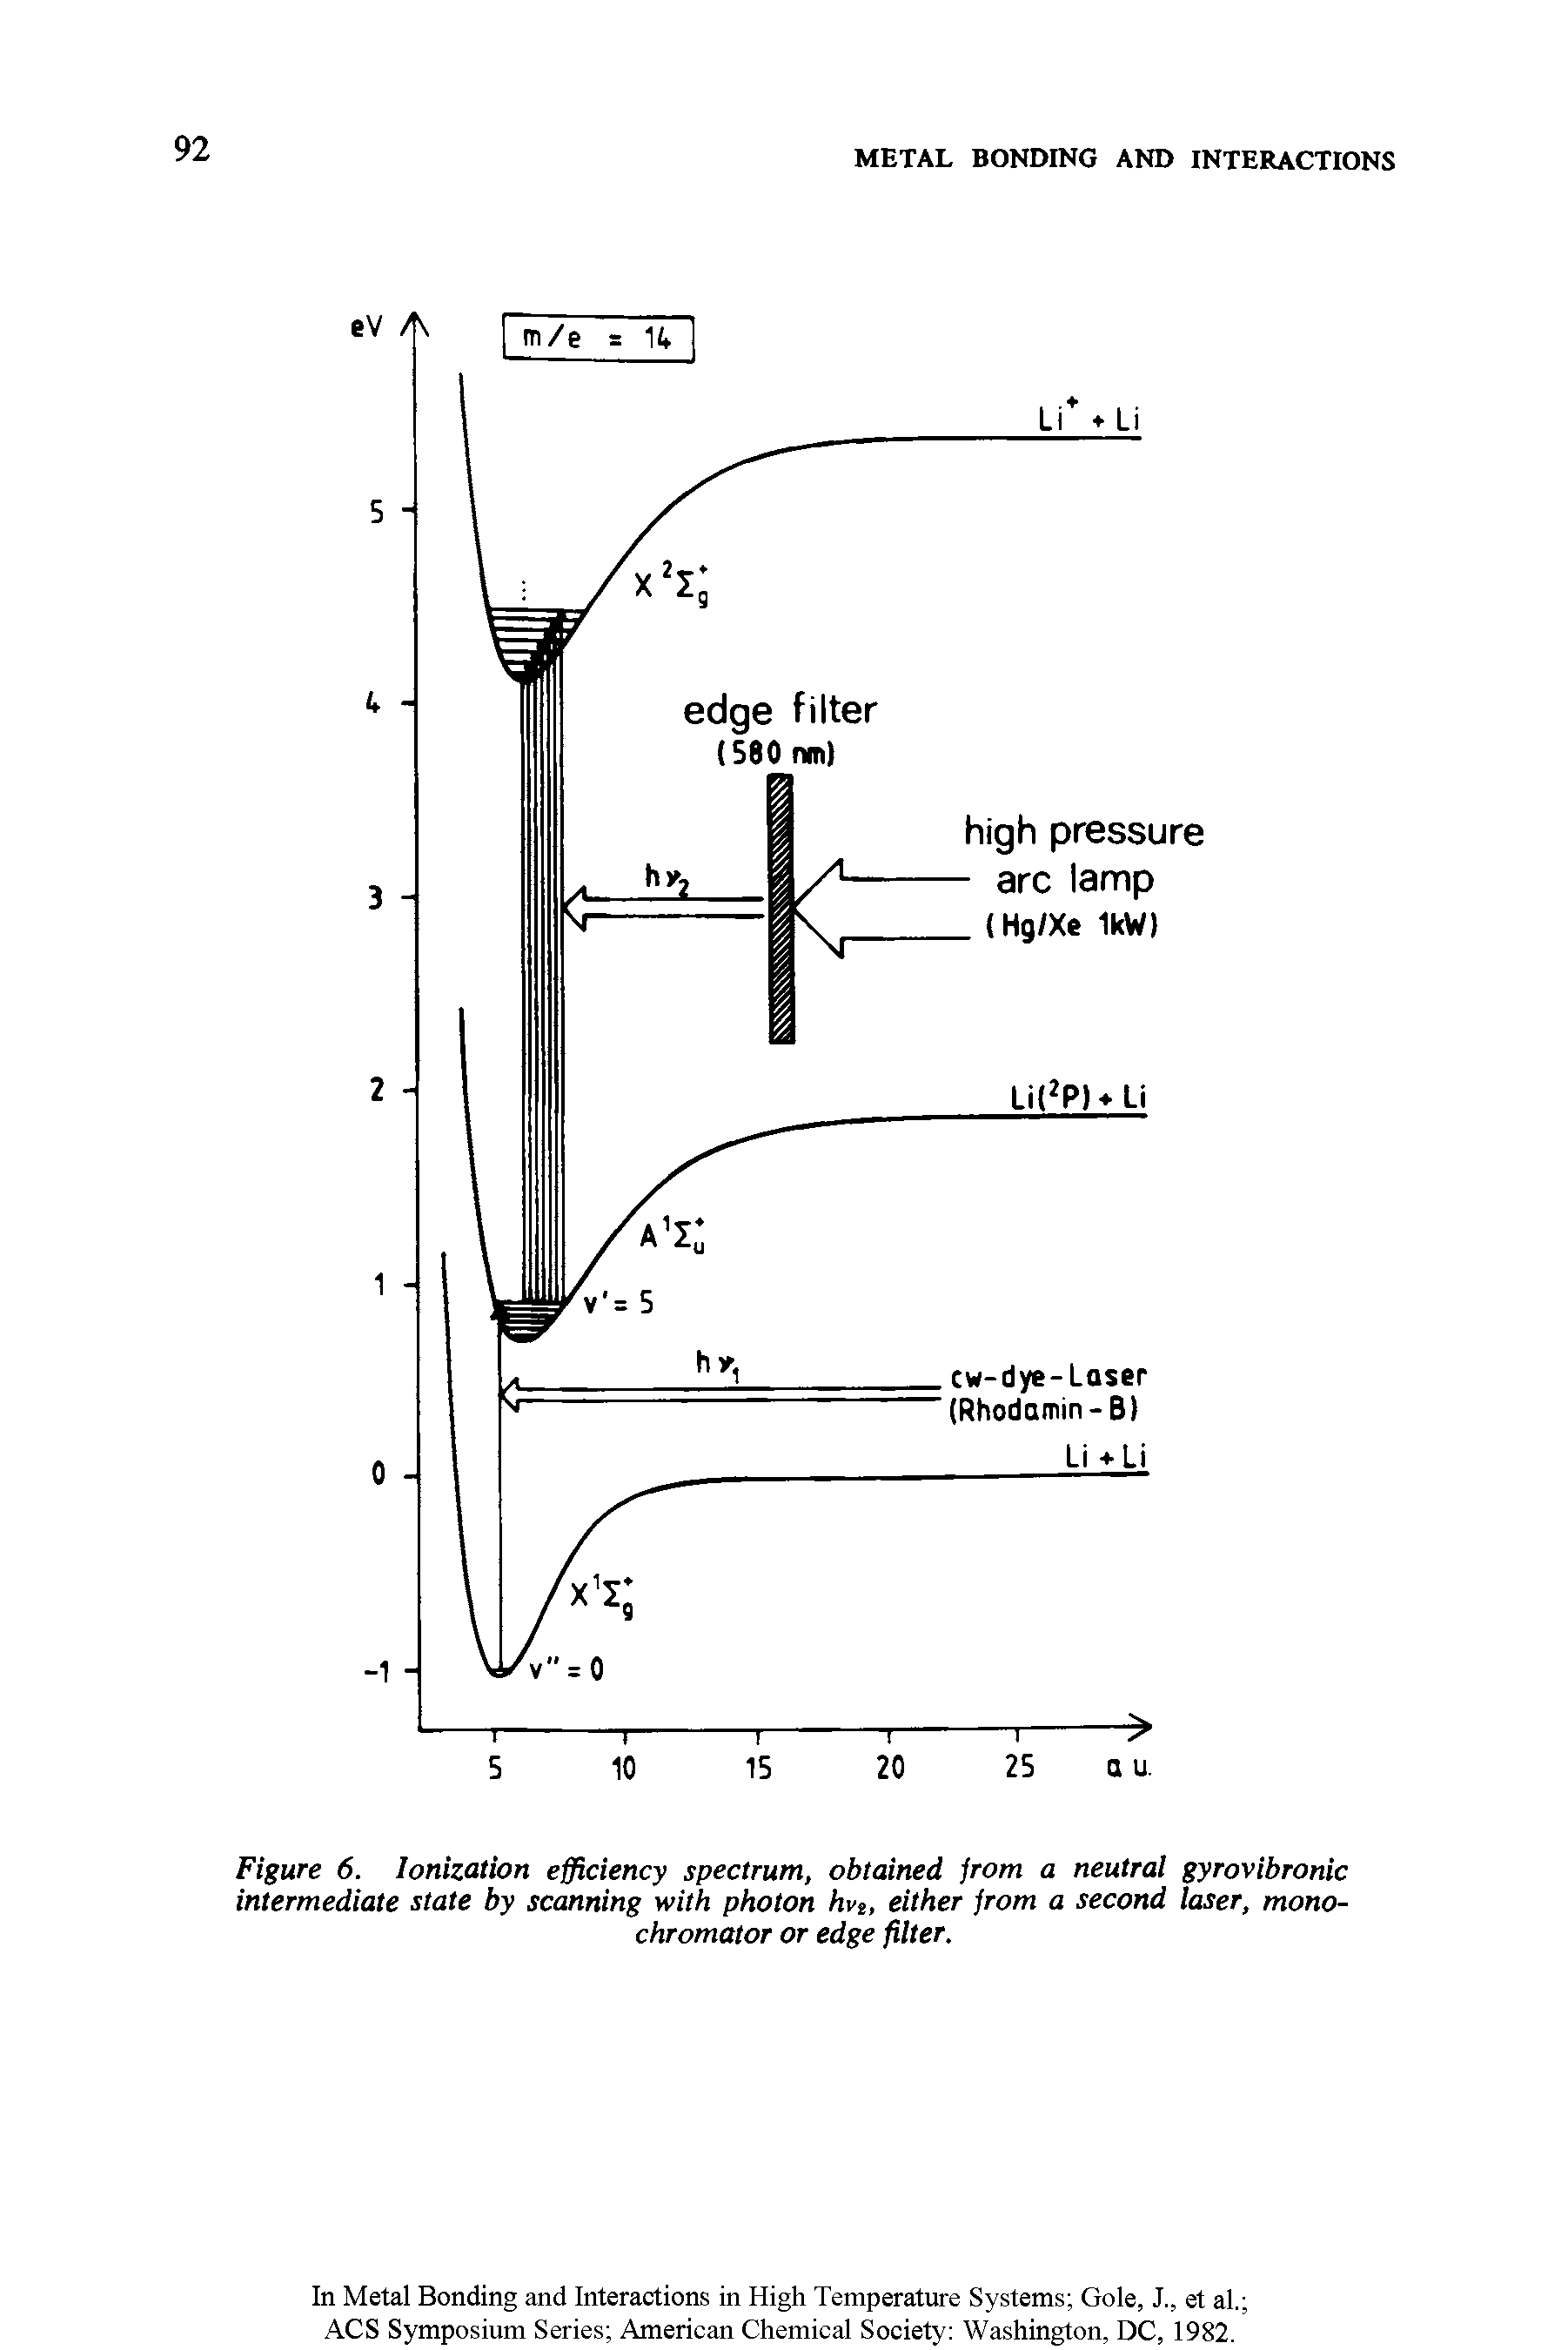 Figure 6. Ionization efficiency spectrum, obtained jrom a neutrai gyrovibronic intermediate state by scanning with photon hvt, either jrom a second laser, monochromator or edge filter.